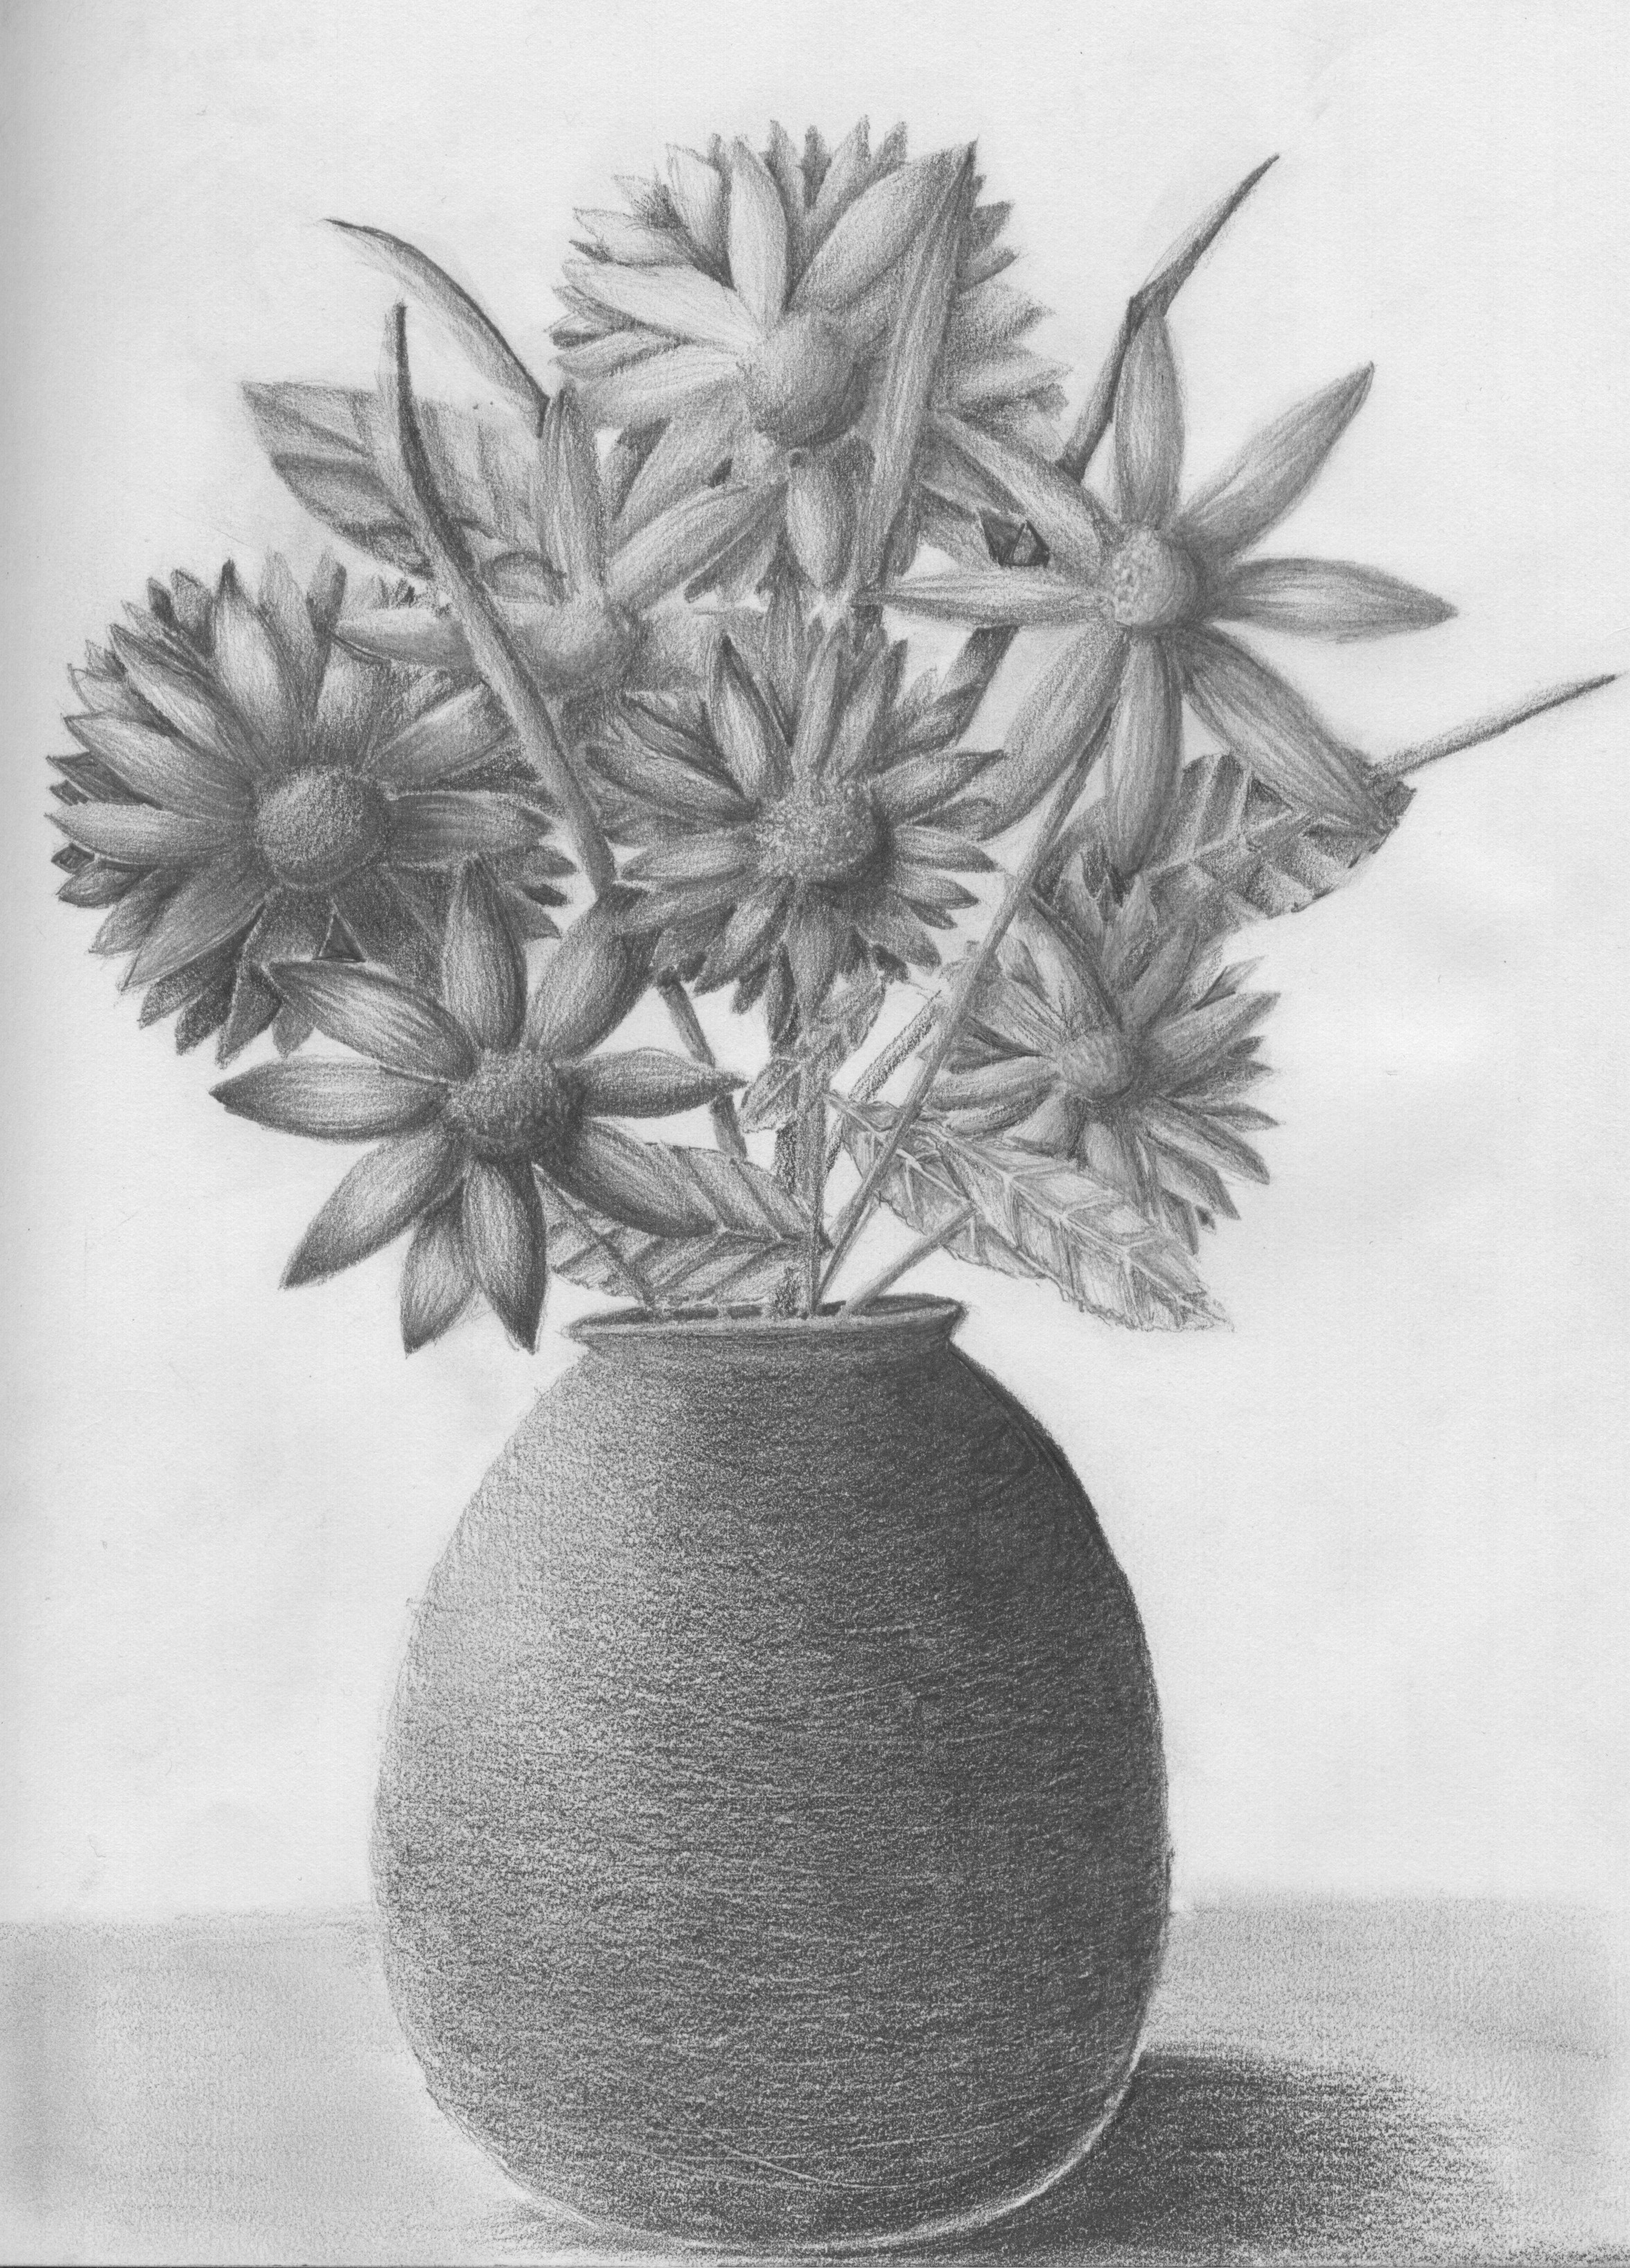 still life flowers in a vase of flower vase image drawing flowers healthy throughout drawn vase pencil drawing pencil and in color drawn vase pencil